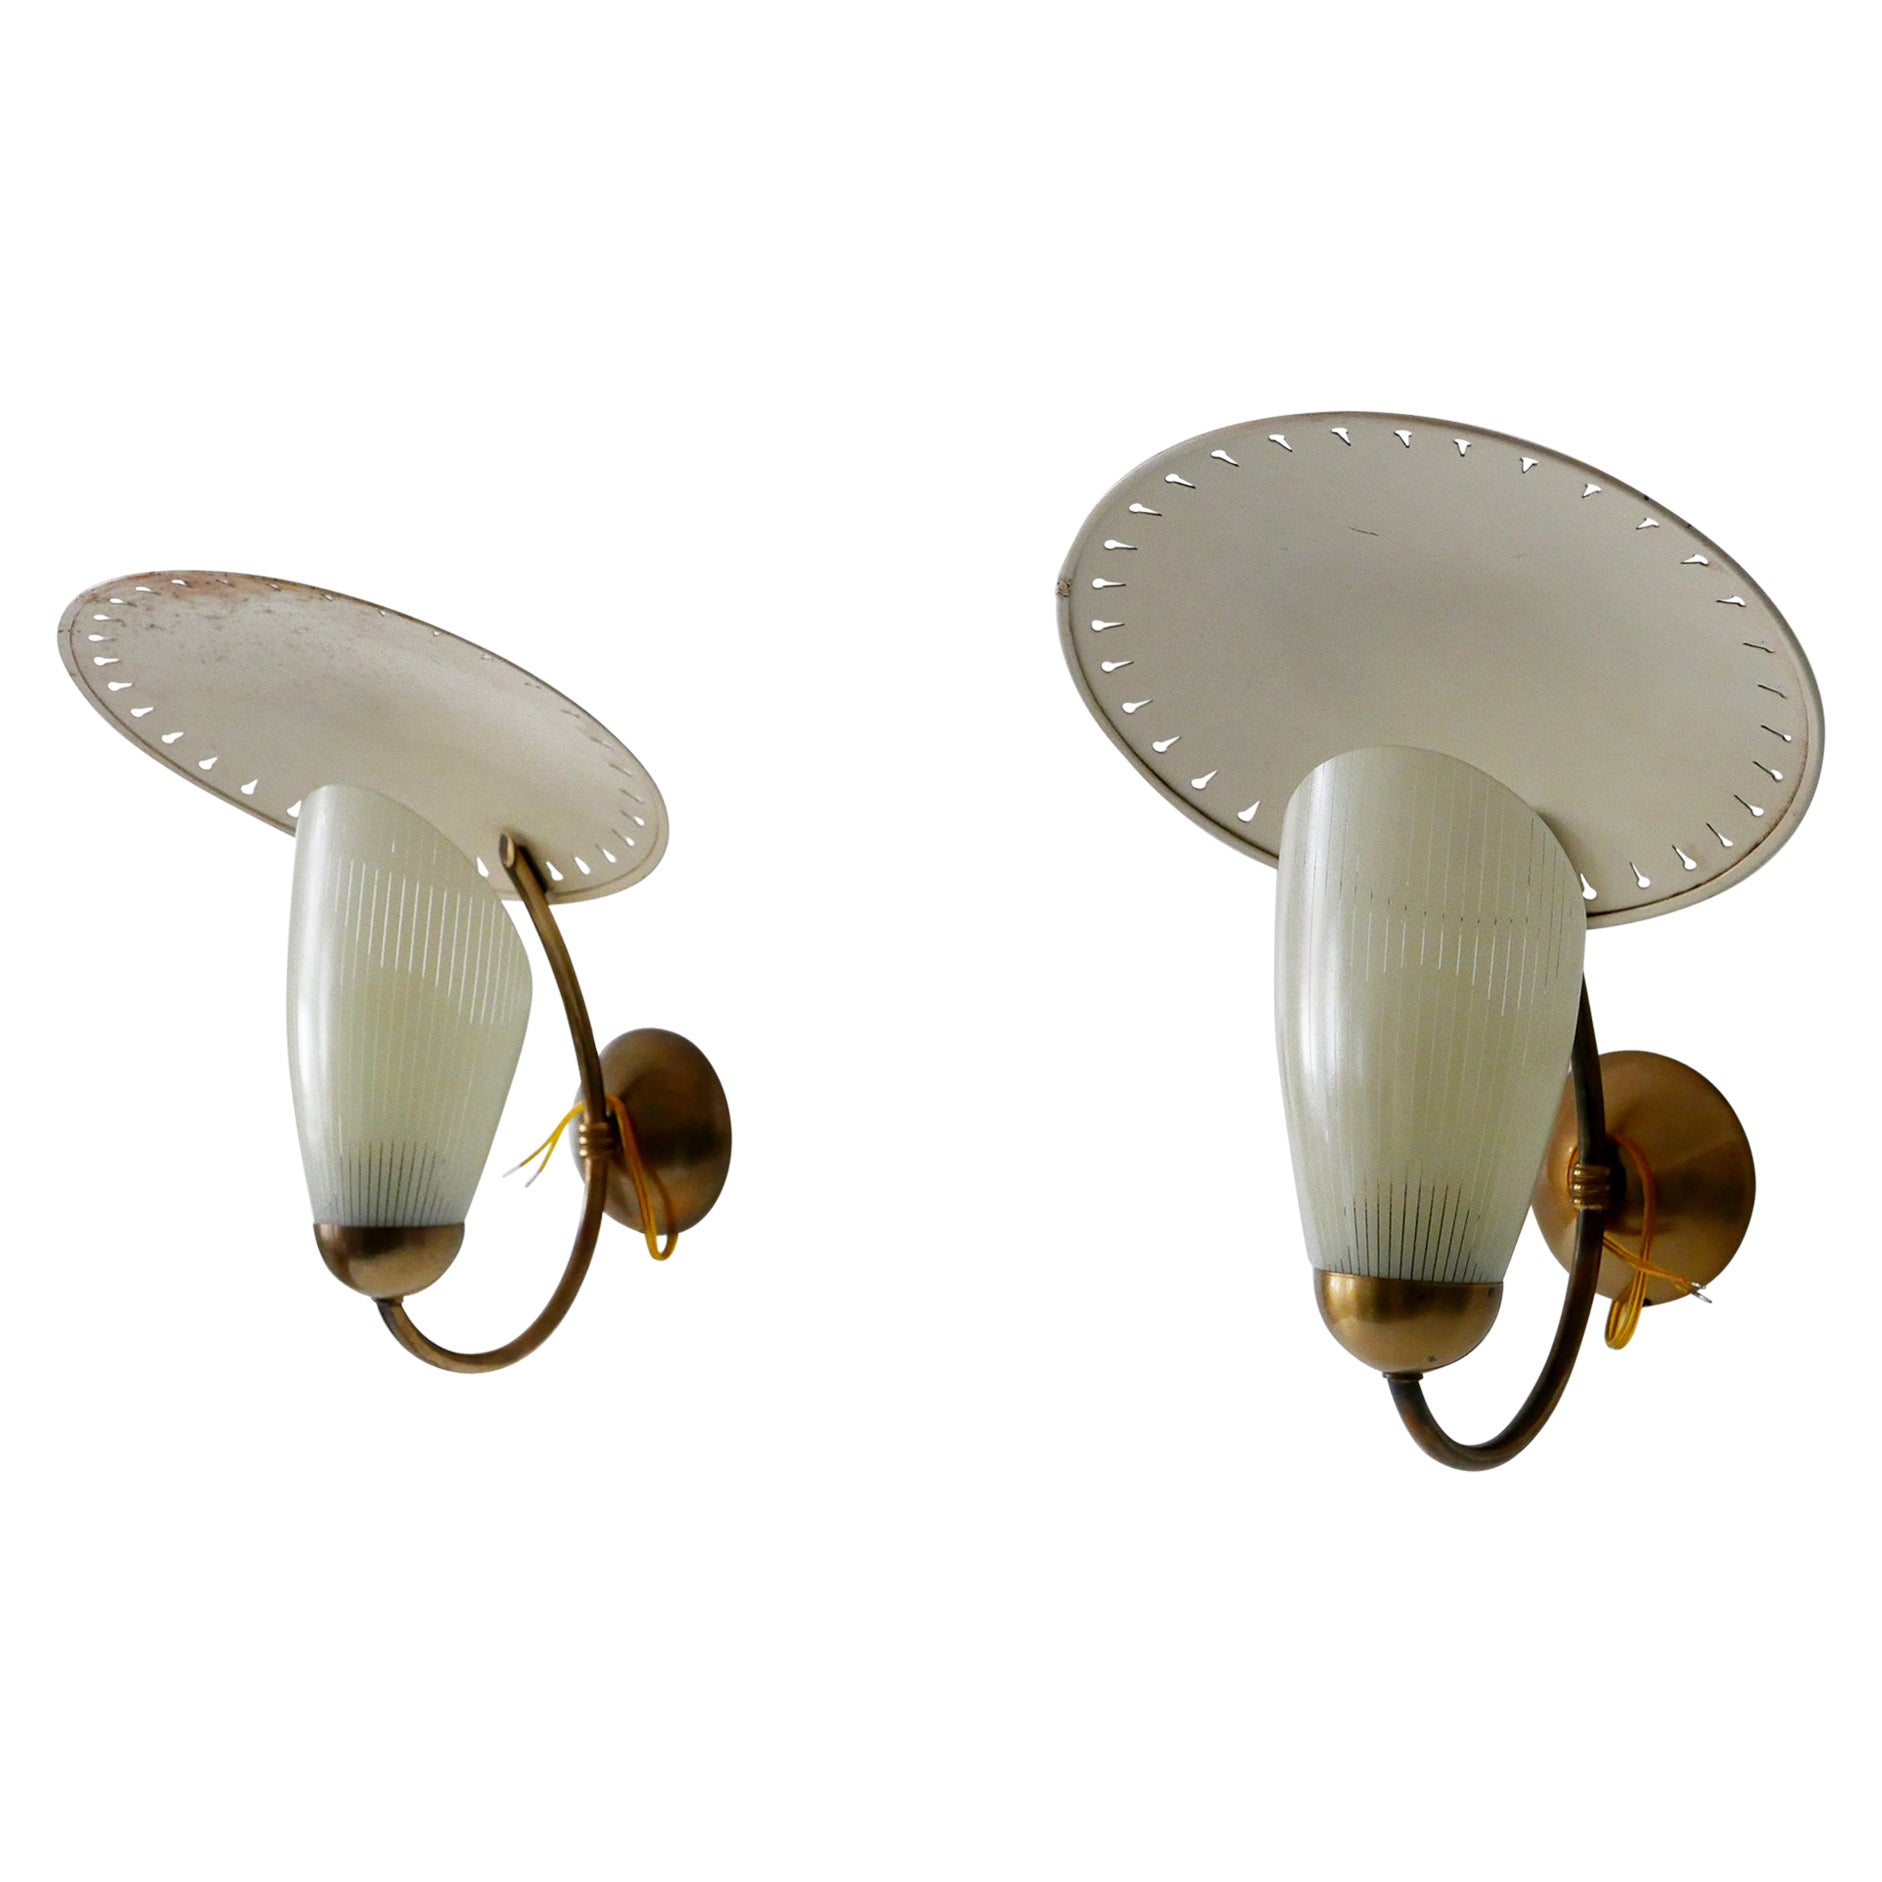 Set of Two Rare Mid-Century Modern Sputnik Sconces or Wall Lights Germany 1950s For Sale